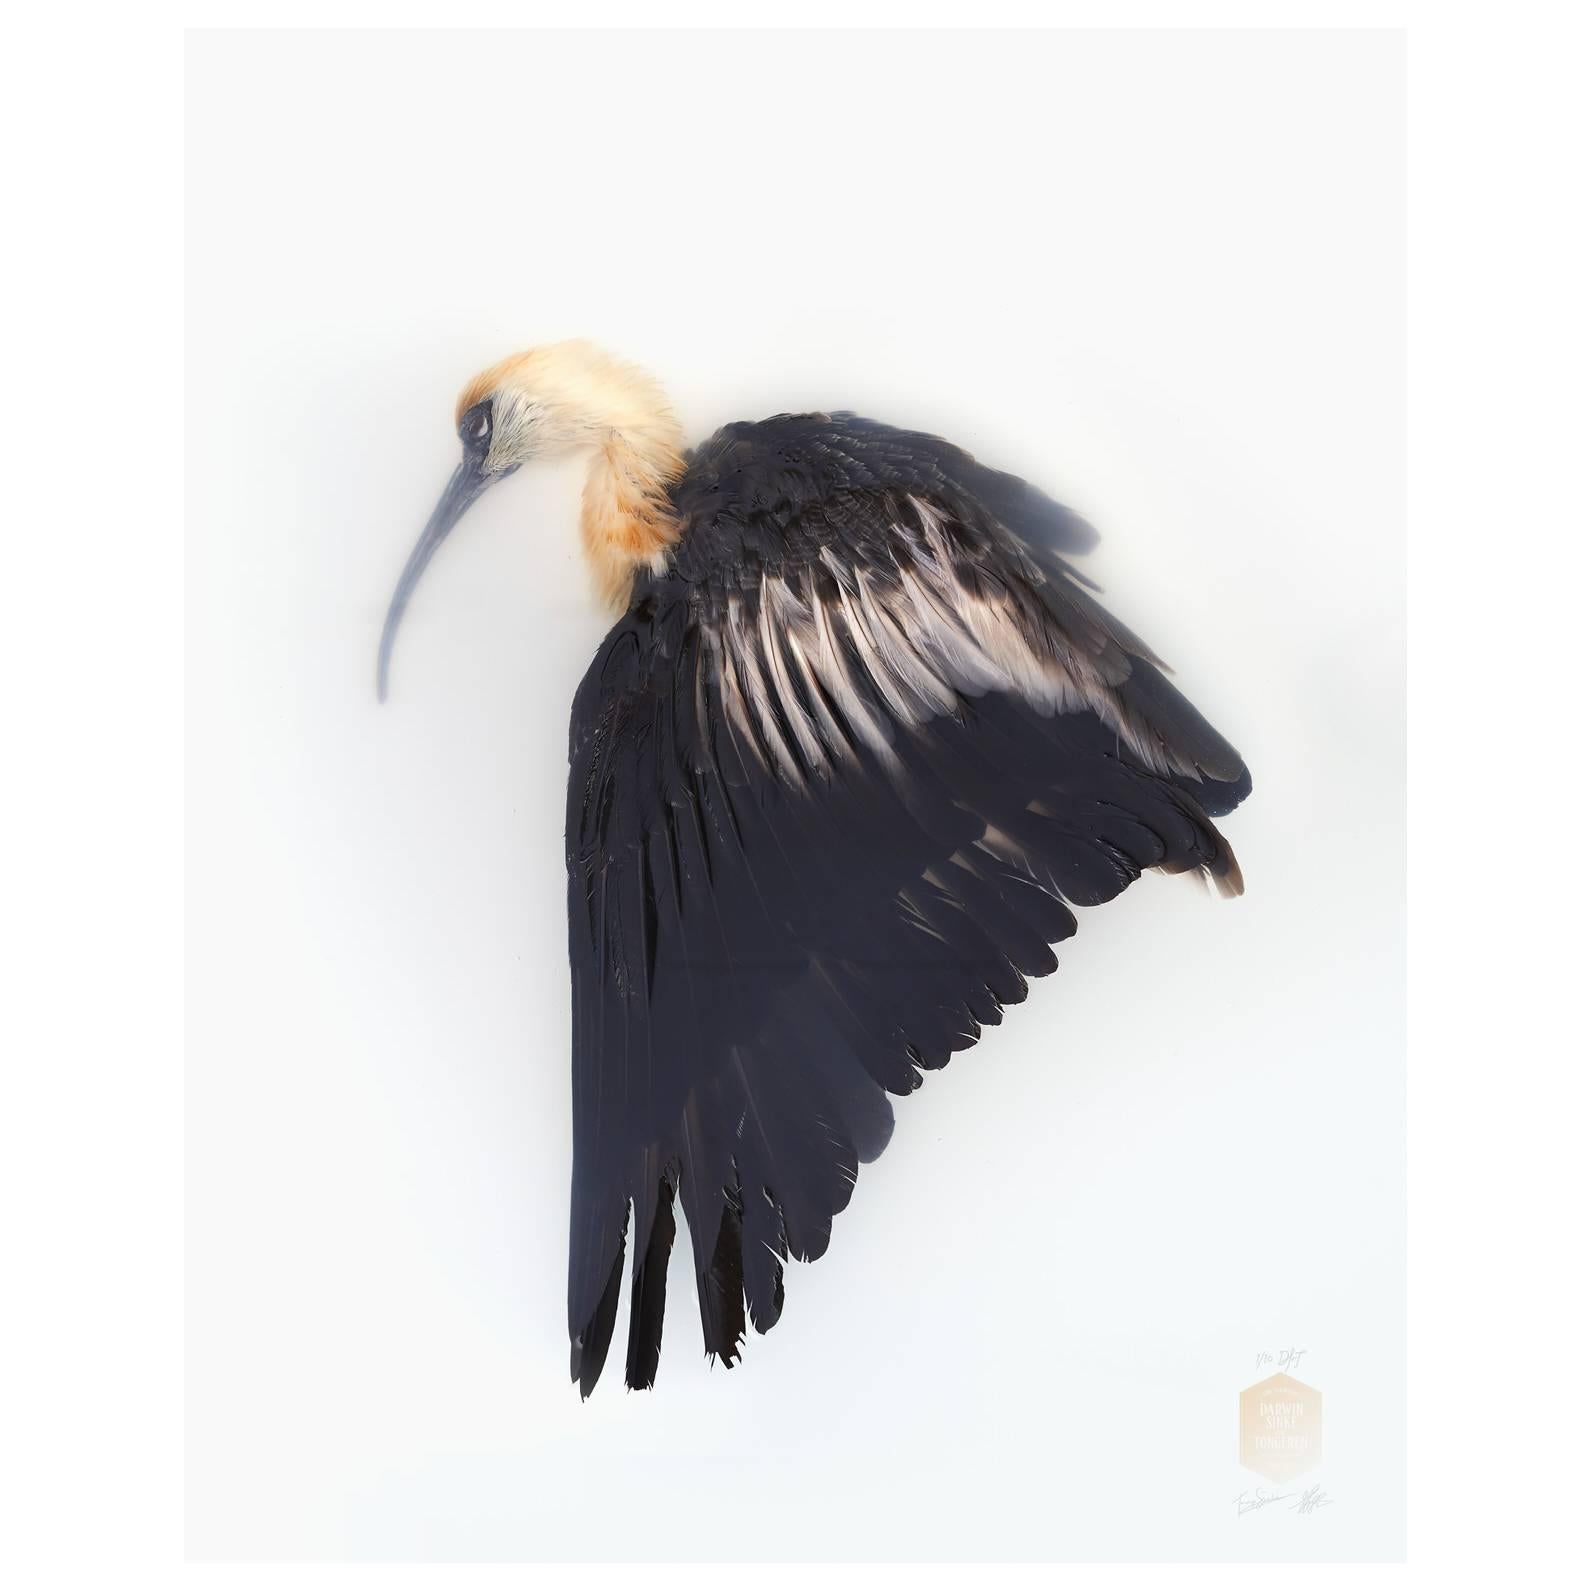 Art Print Titled 'Unknown Pose by Black-faced Ibis' by Sinke & Van Tongeren For Sale